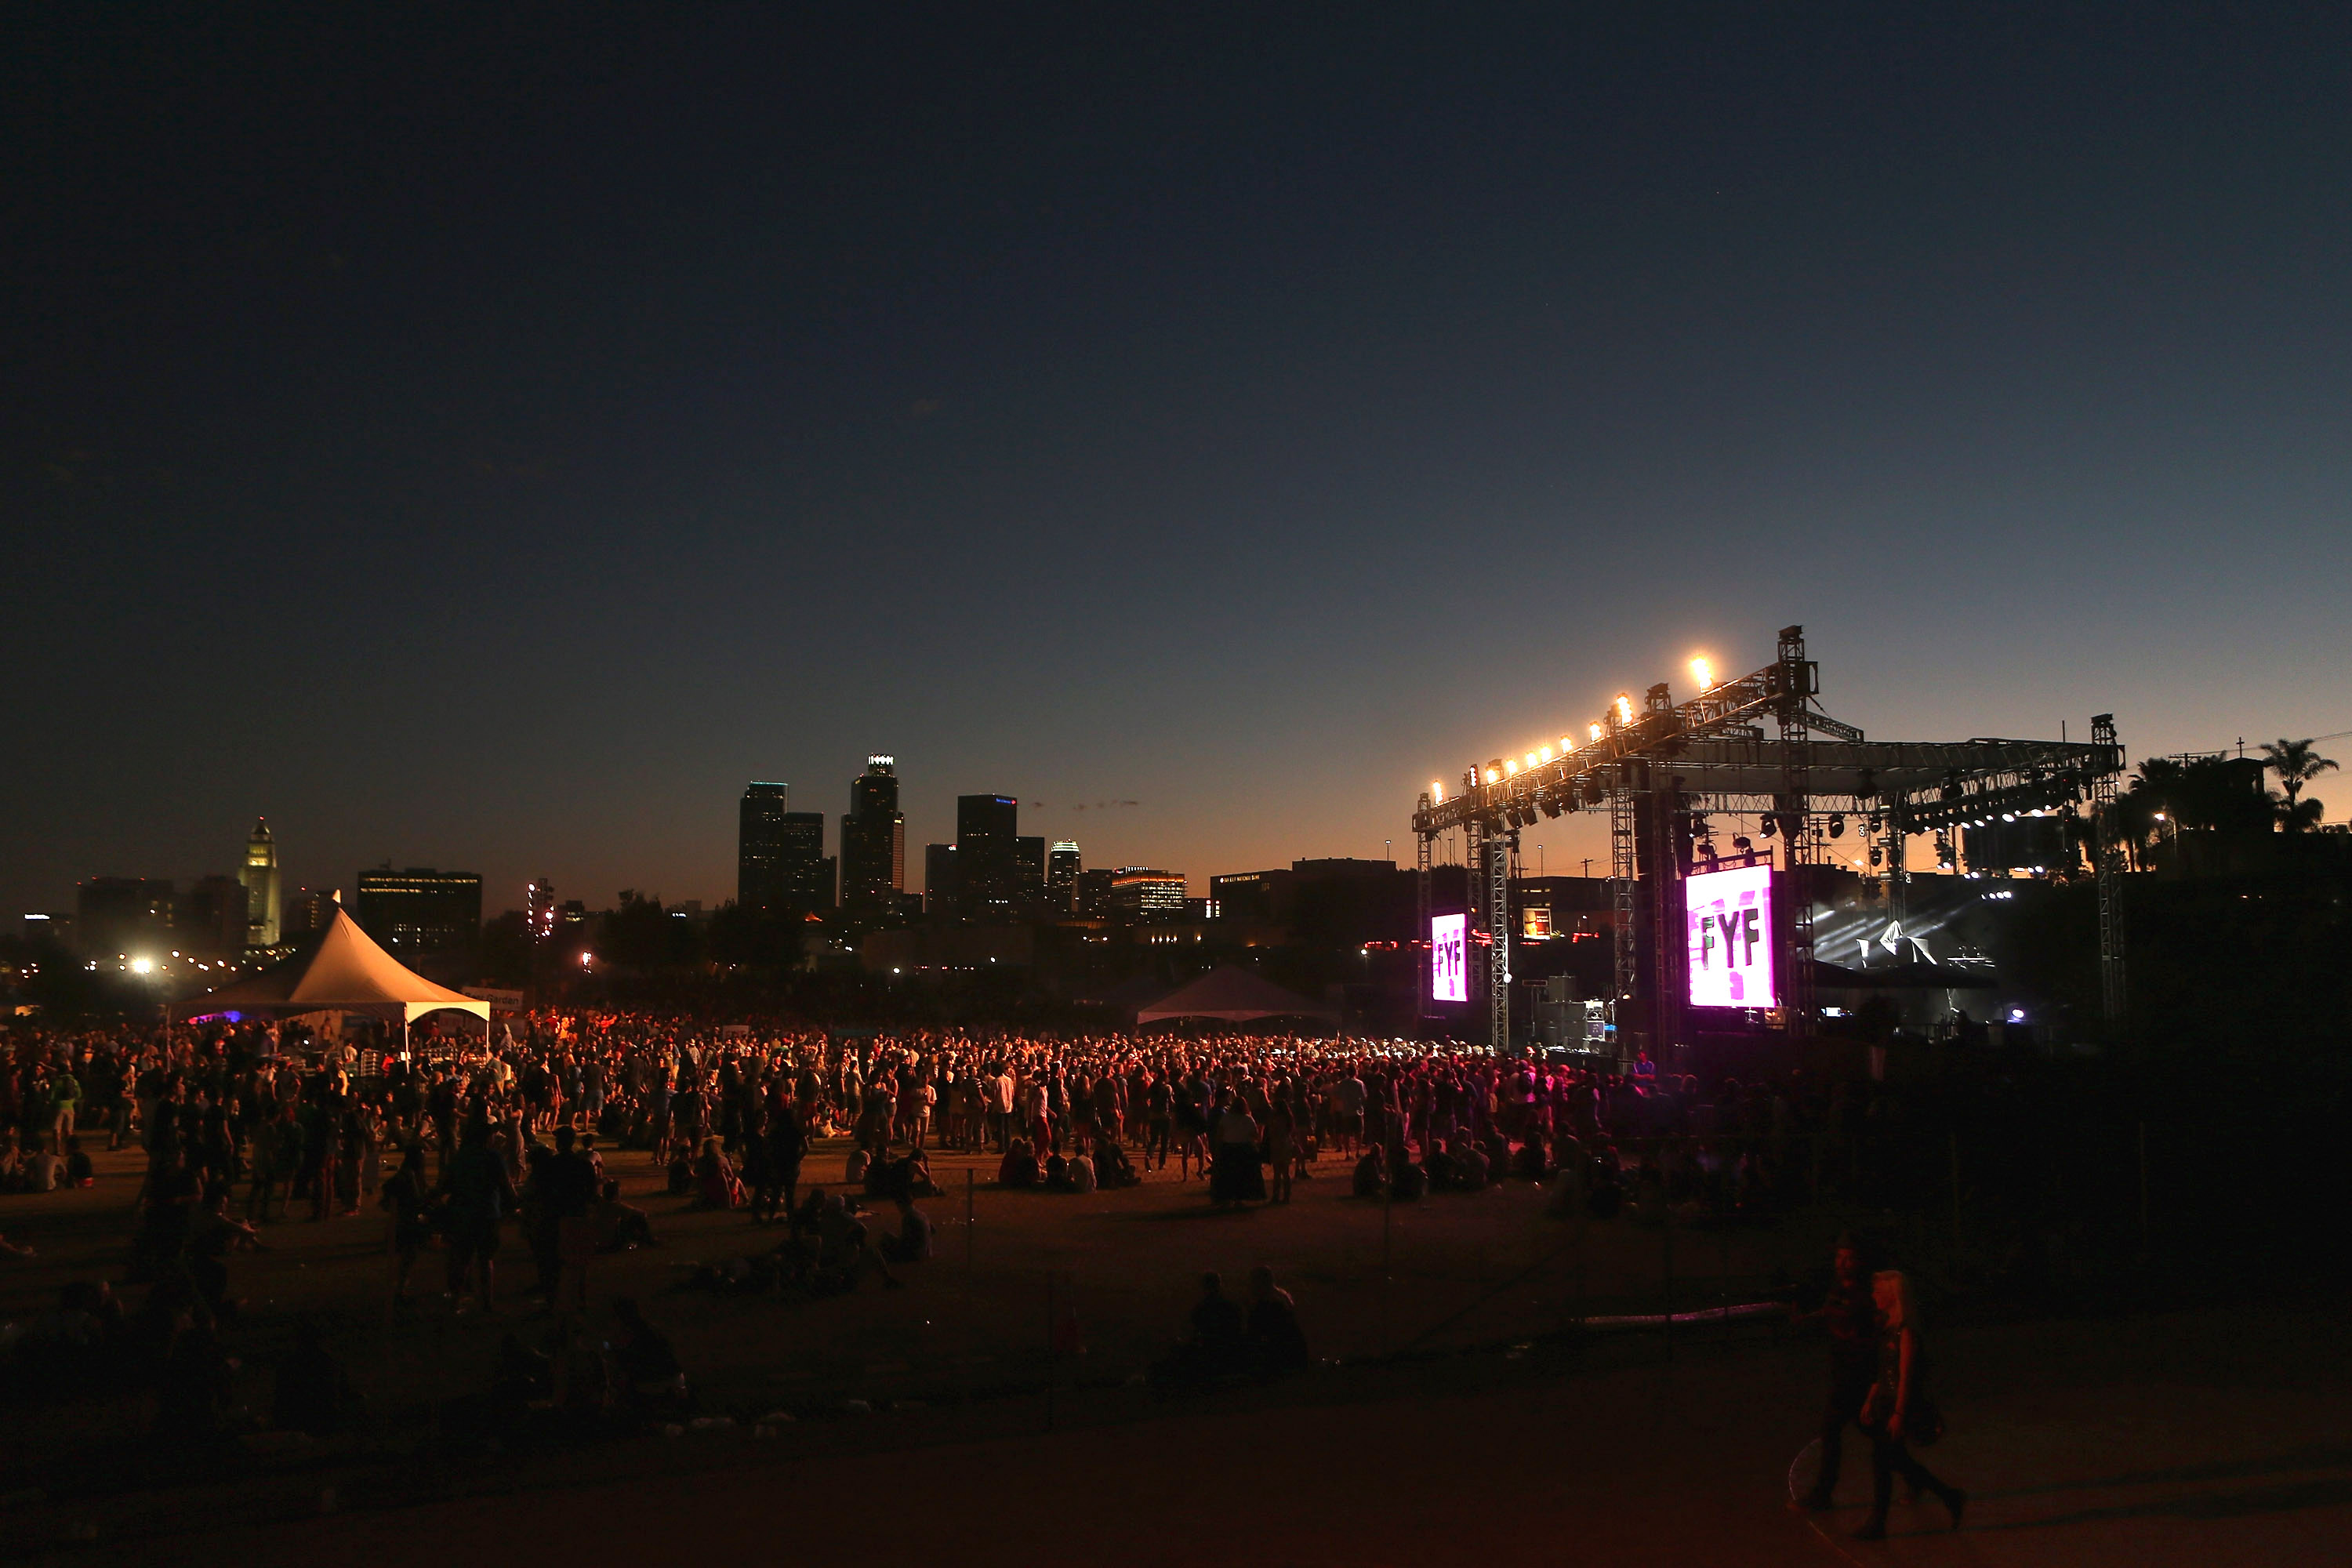 FYF Fest Cancelled Due to Poor Ticket Sales